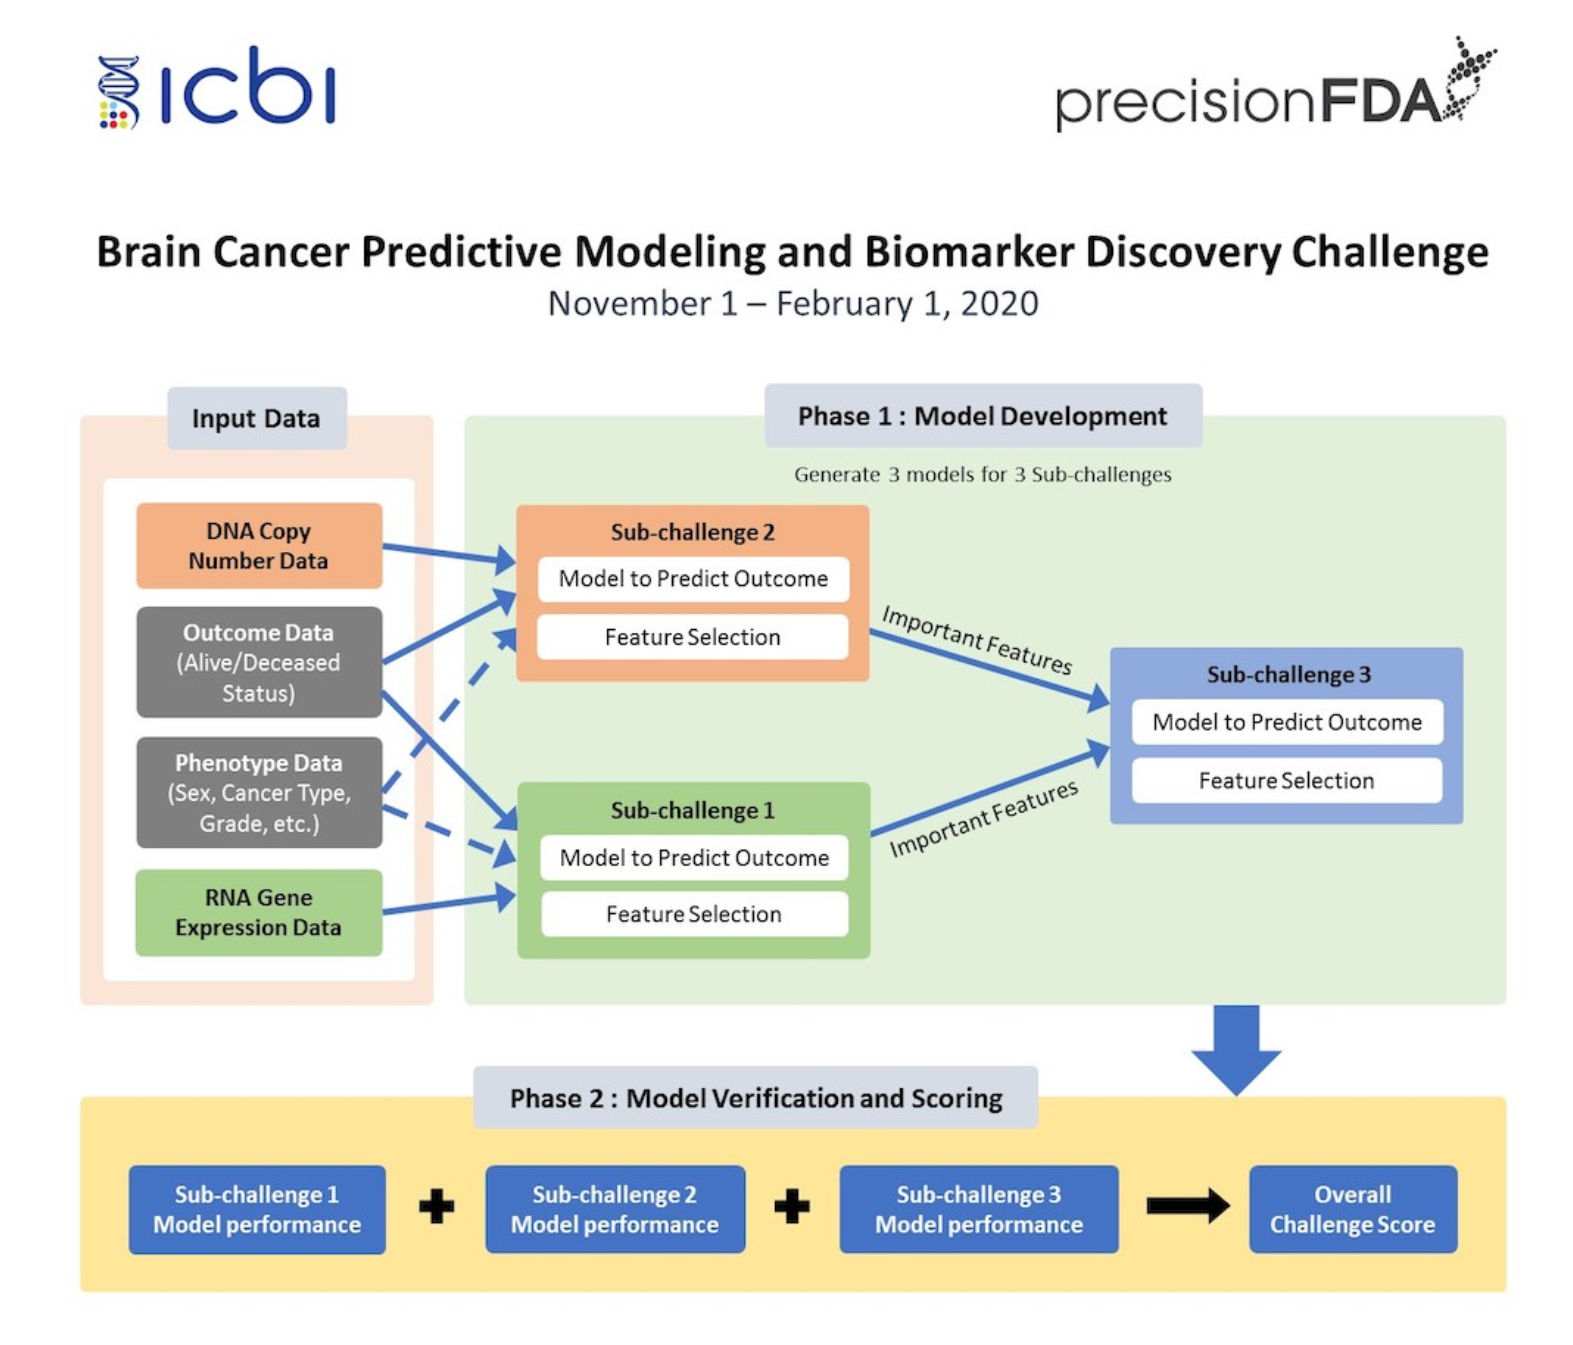 Brain Cancer Predictive Modeling and Biomarker Discovery Challenge